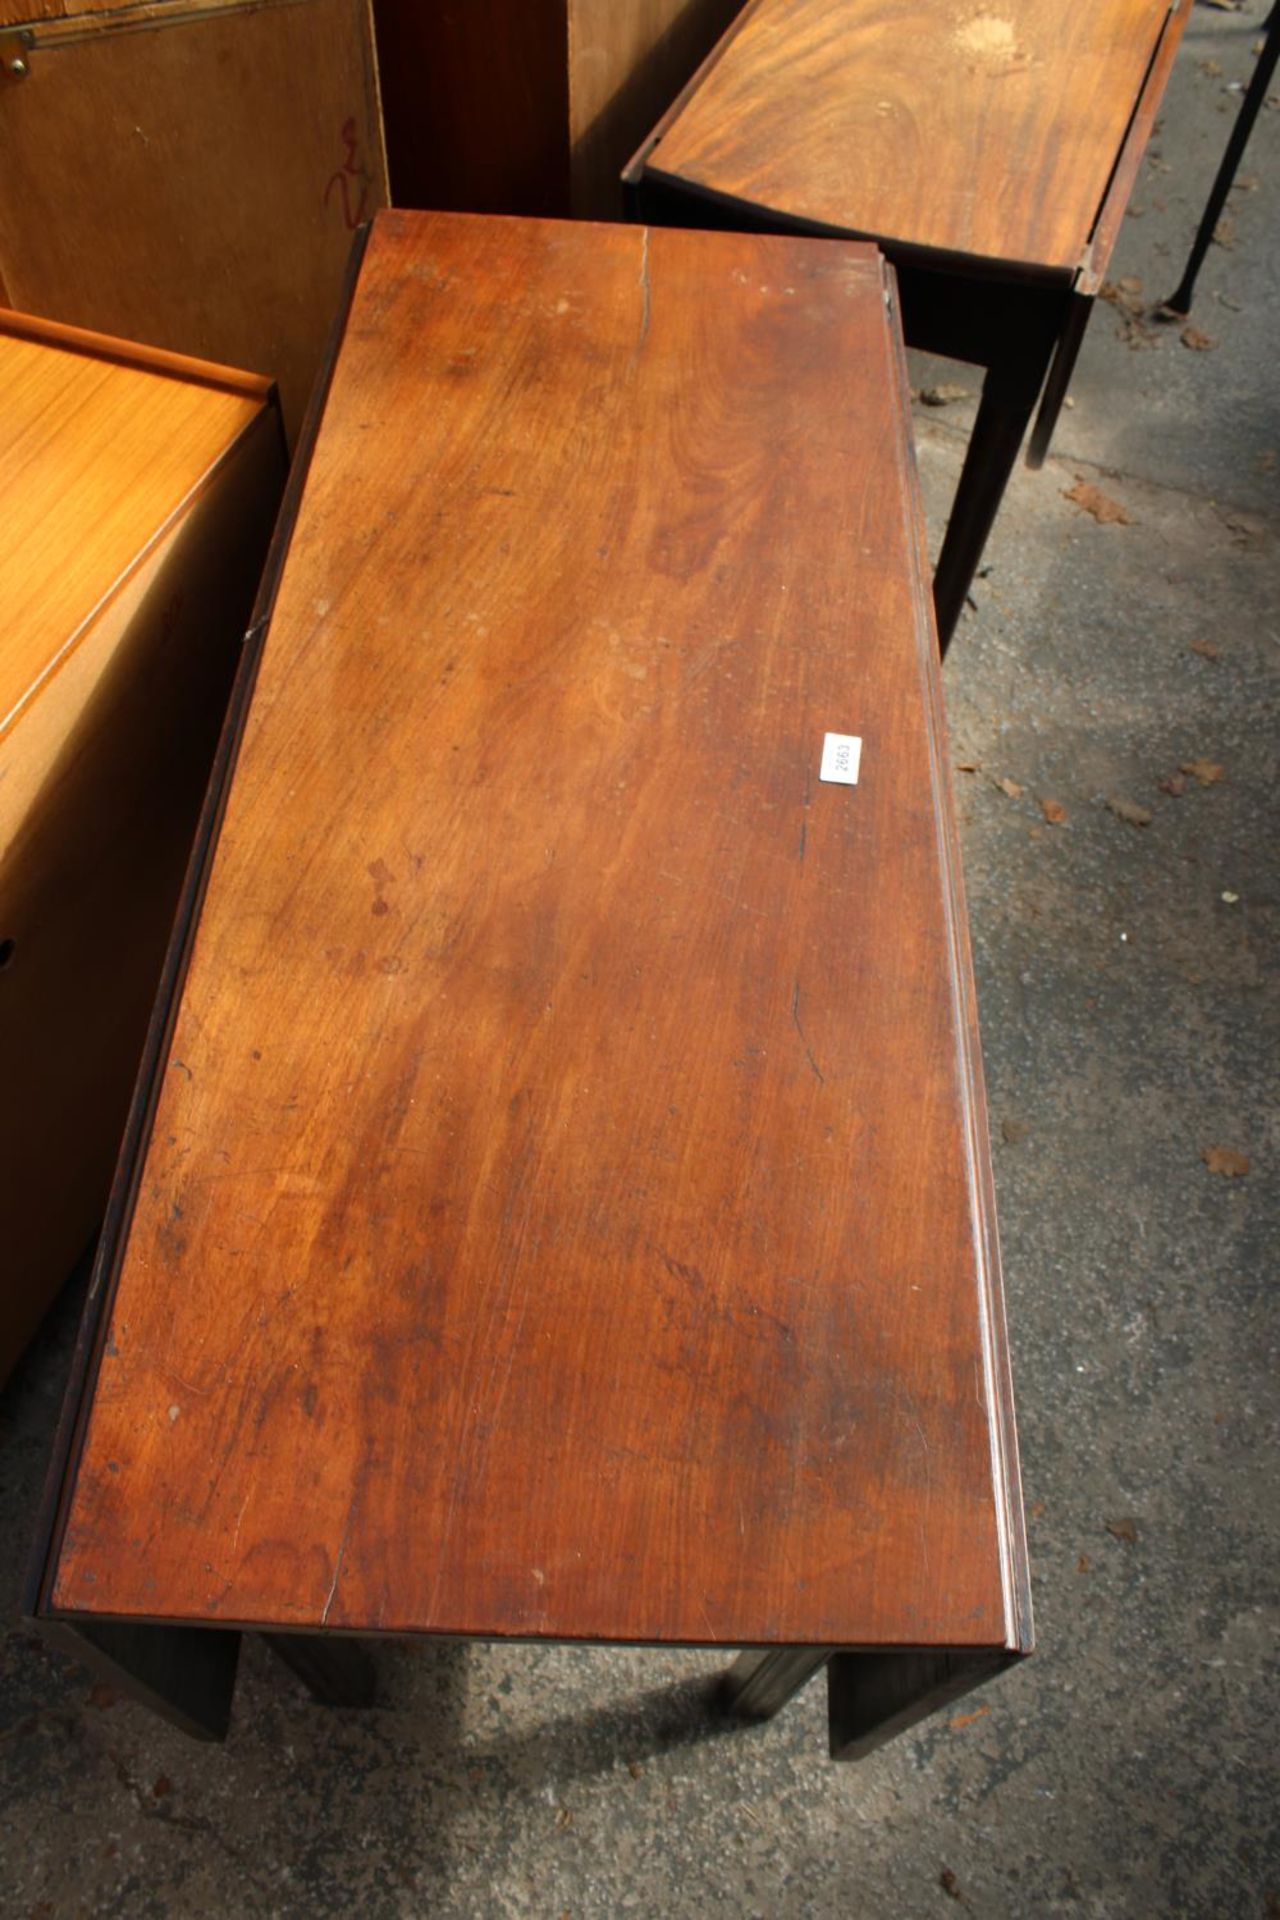 A 19TH CENTURY MAHOGANY DROP-LEAF DINING TABLE, 51" X 42" OPENED - Image 3 of 3